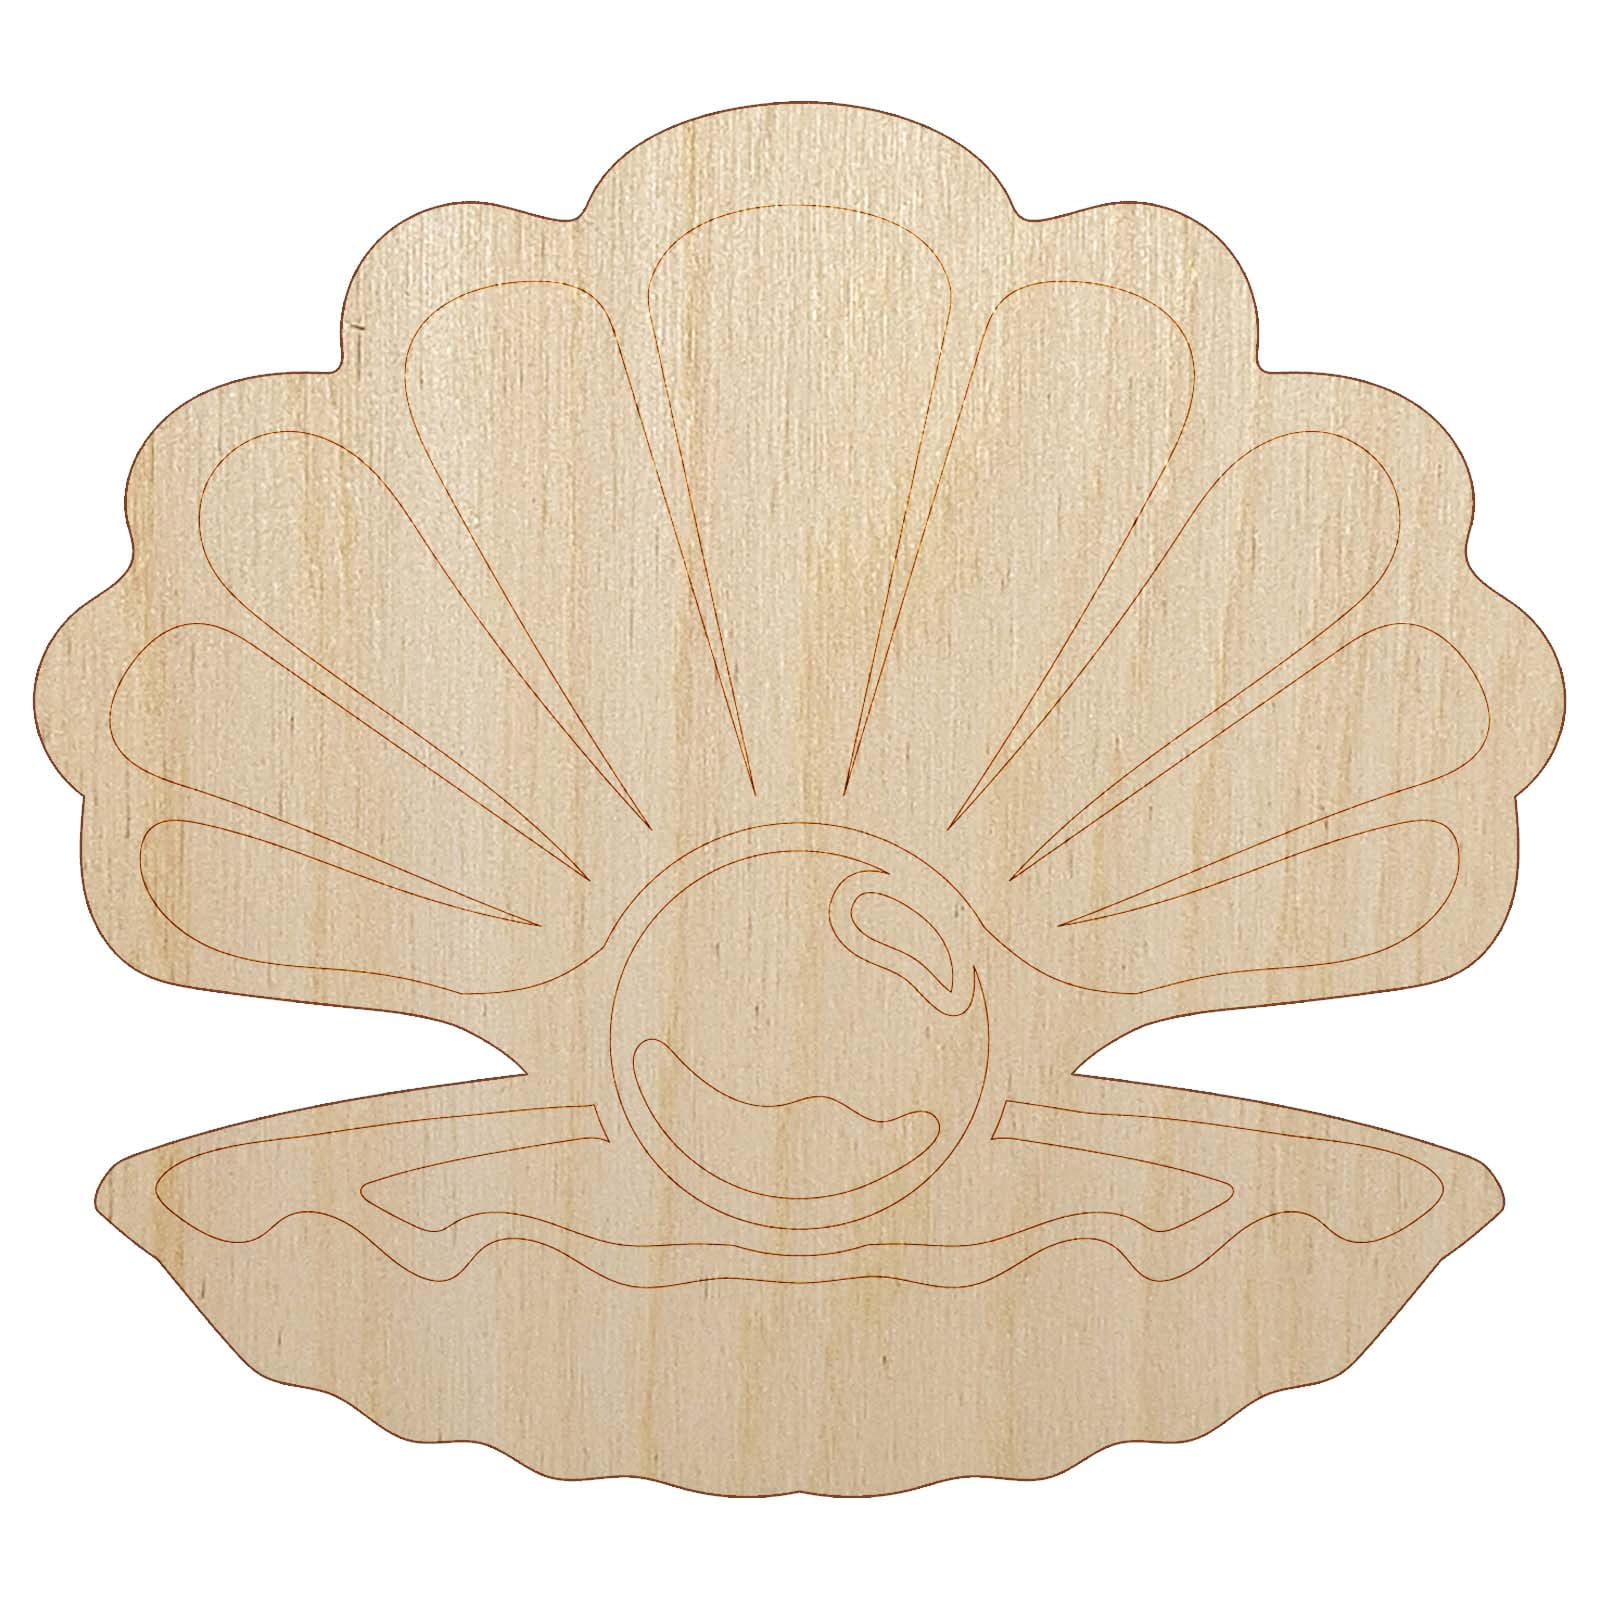 Set of 6 Real Baking Scallop Shells (3 1/2-3 7/8) for Cooking, Baking,  Serving Food Beach Crafts and Coastal Decor